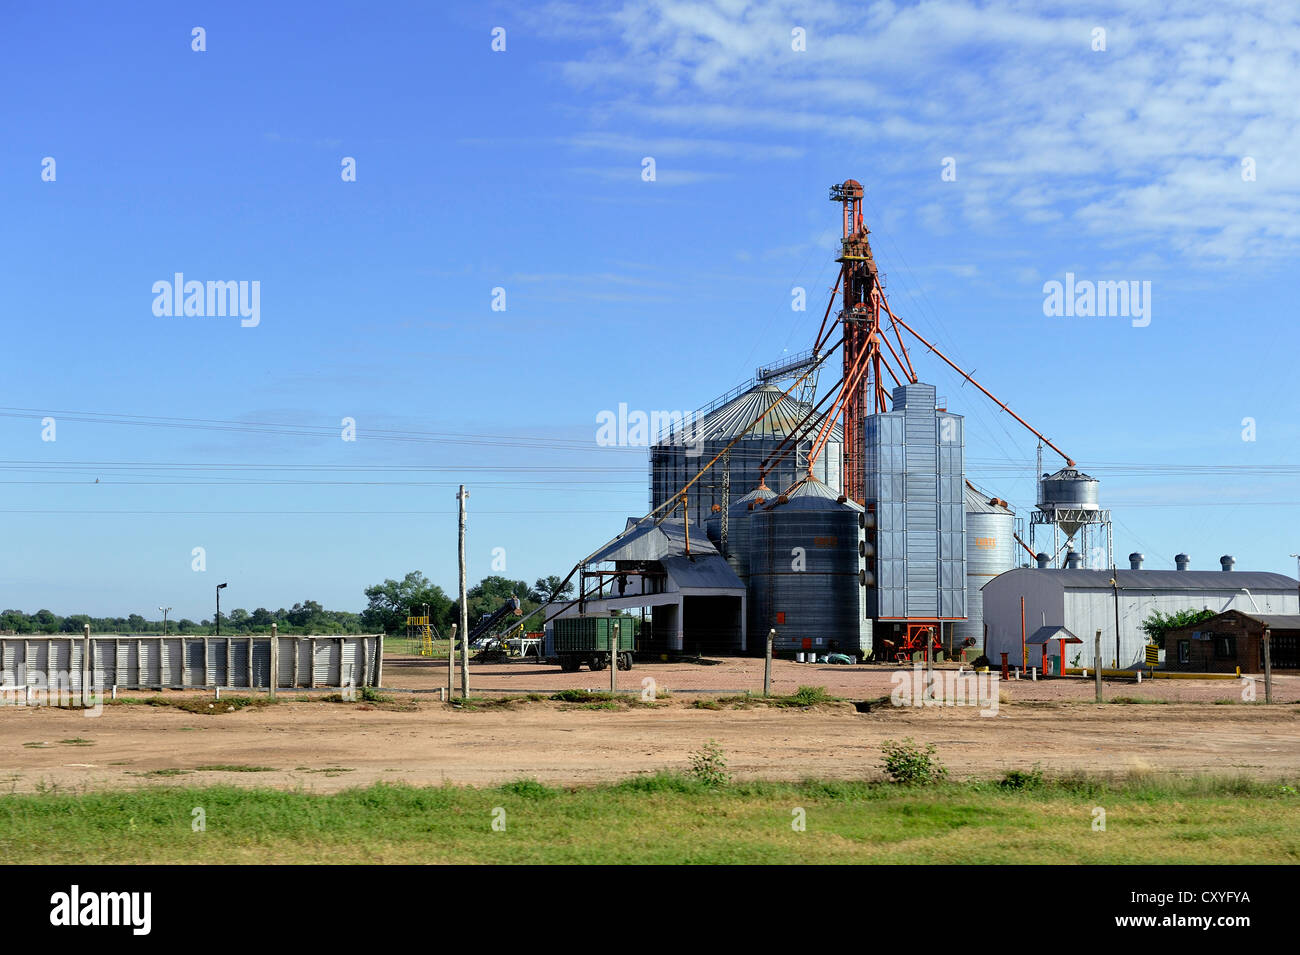 Grain silos, used for soybean storage, Formosa province, Argentina, South America Stock Photo